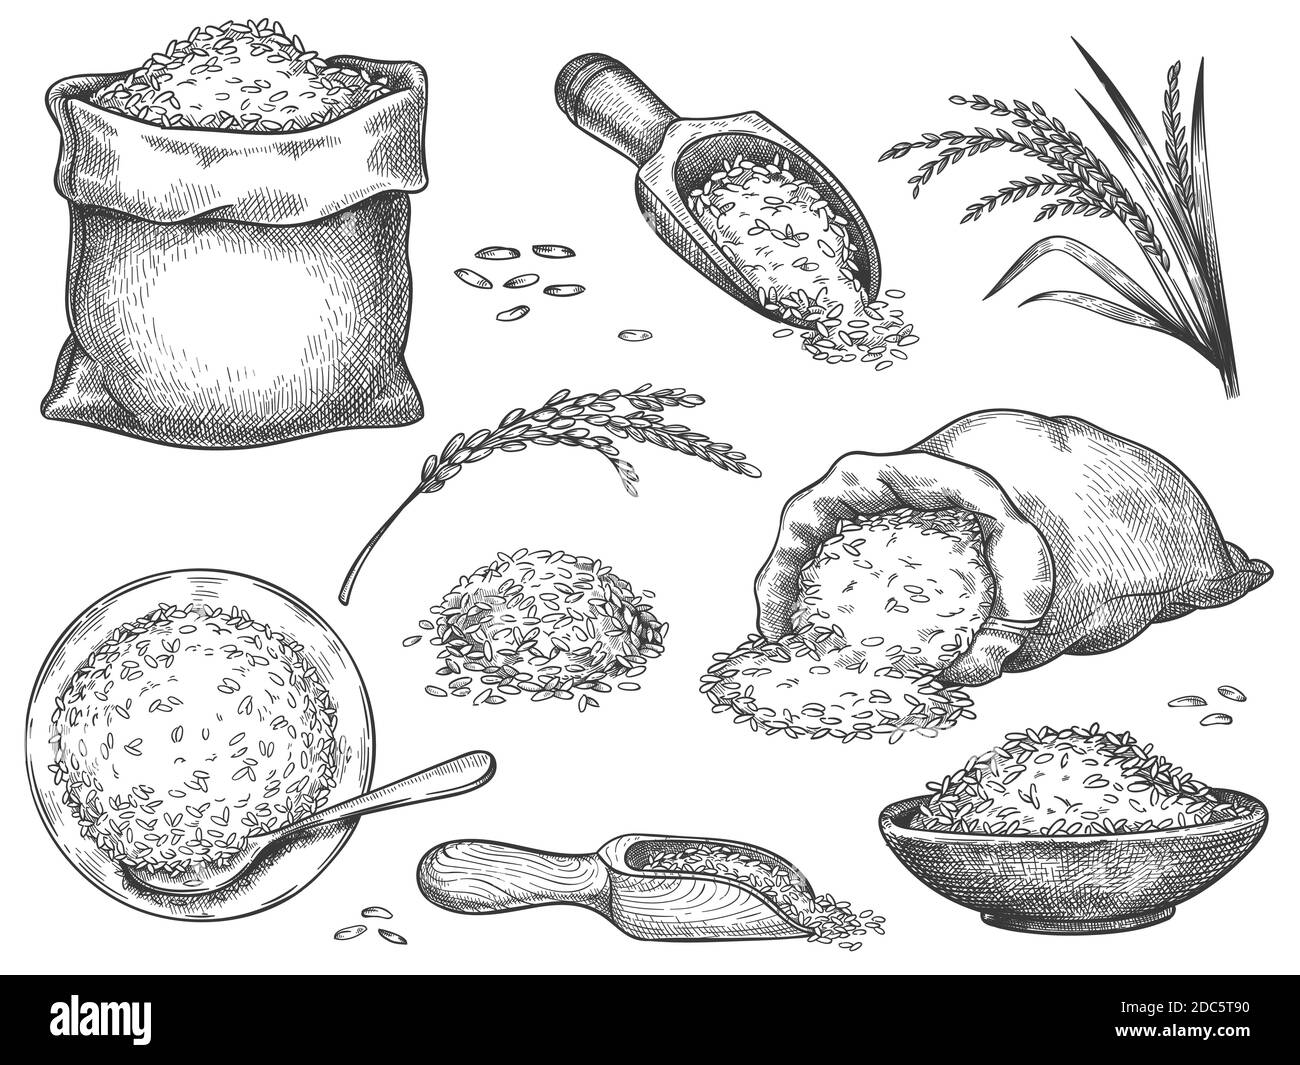 Hand drawn rice flour. Retro engraving cereal spikelets of wheat, rye, barley, basmati or jasmine rice. Grains in sack and scoop vector set Stock Vector